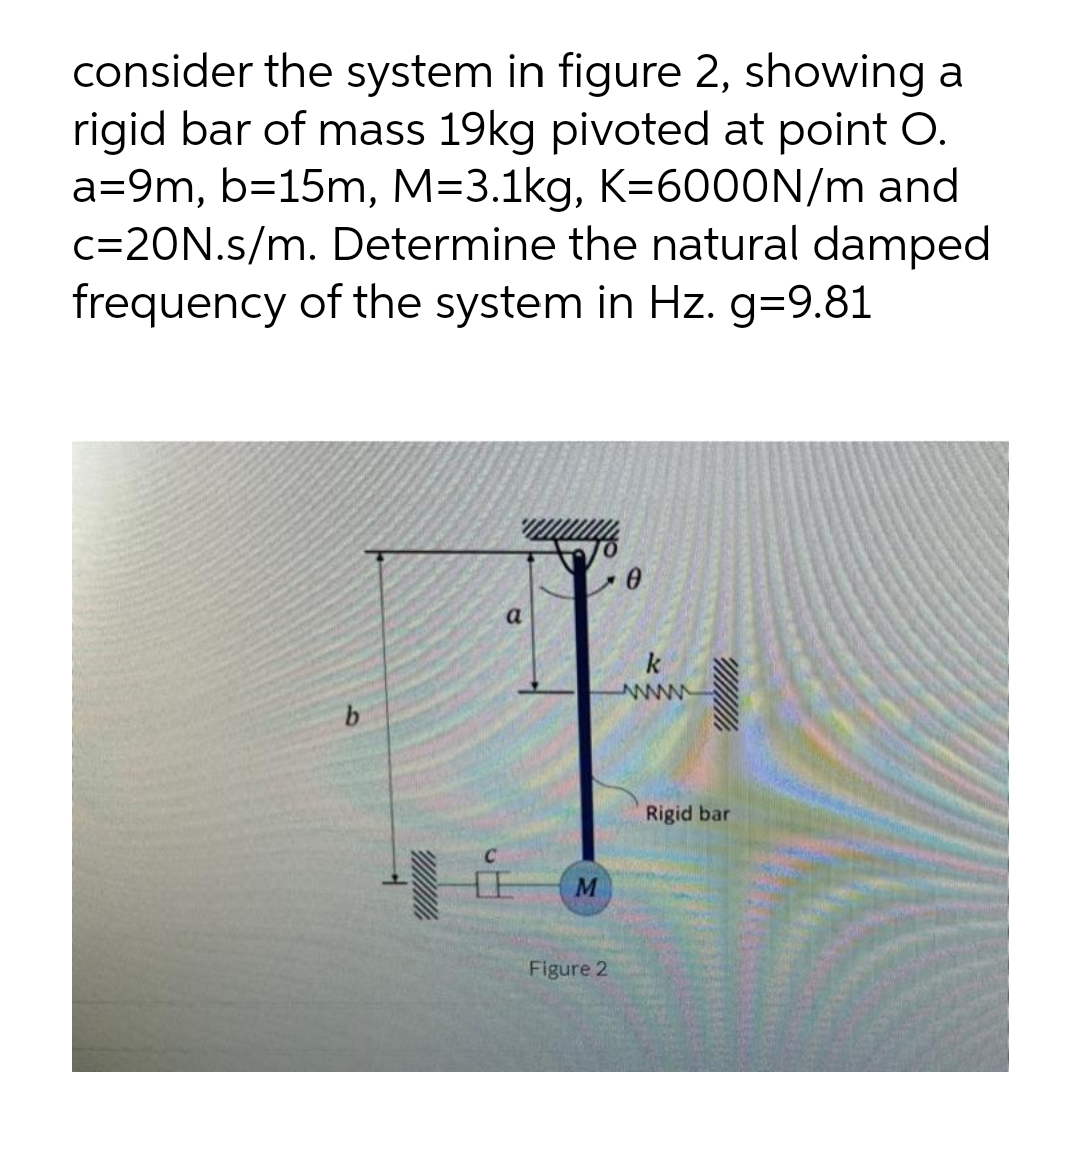 consider the system in figure 2, showing a
rigid bar of mass 19kg pivoted at point O.
a=9m, b=15m, M=3.1kg, K=6000N/m and
c=20N.s/m. Determine the natural damped
frequency of the system in Hz. g=9.81
a
k
www
b
E
M
Figure 2
Rigid bar